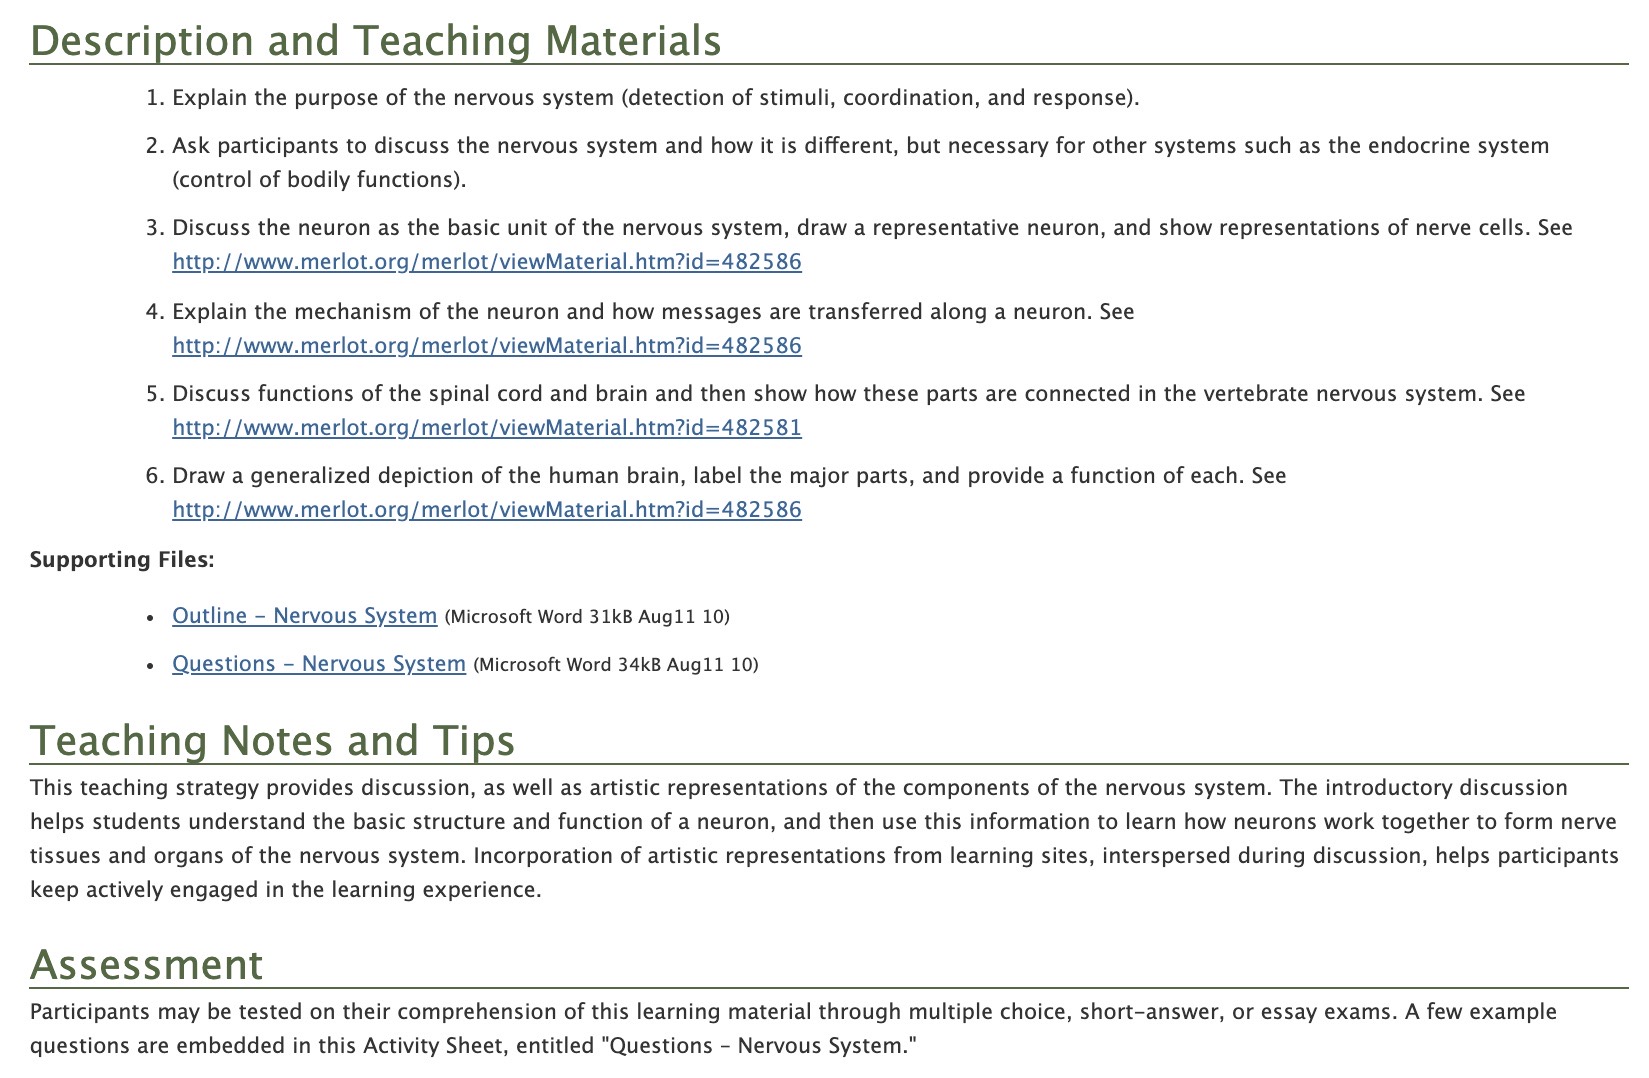 Screenshot of a full OER lesson, activity and assessment